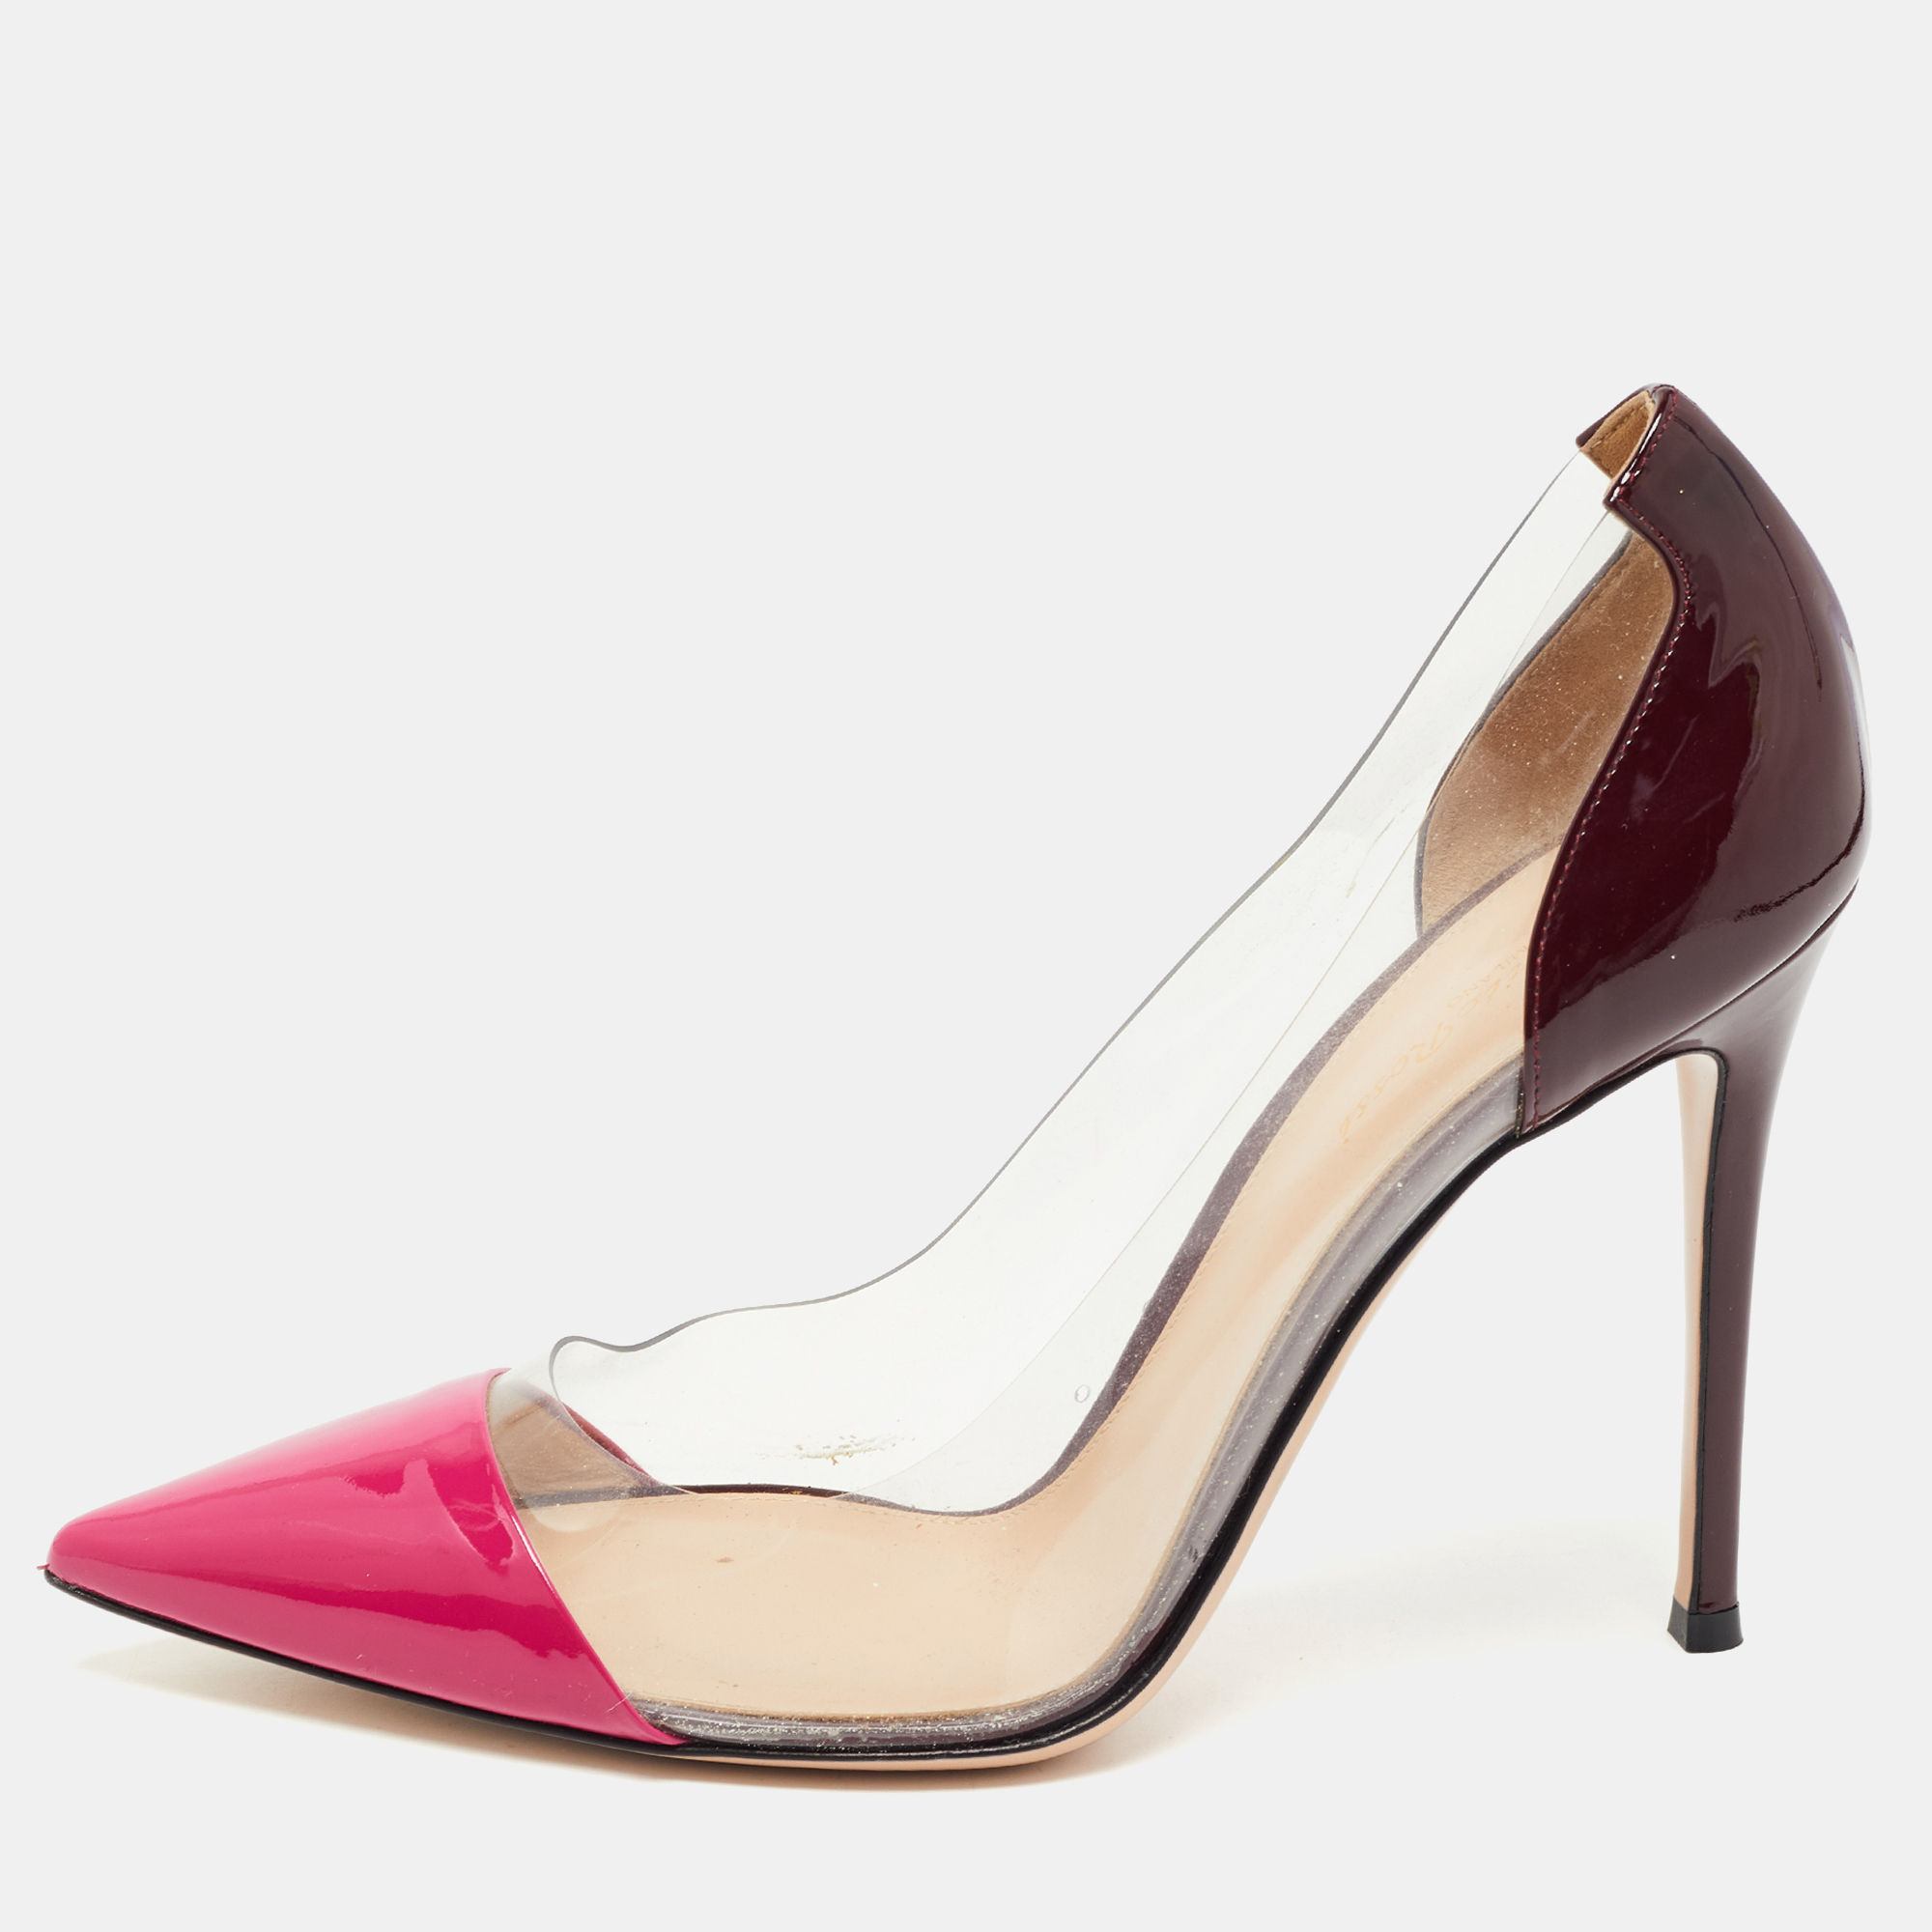 gianvito rossi pink/burgundy patent leather and pvc plexi pumps size 41